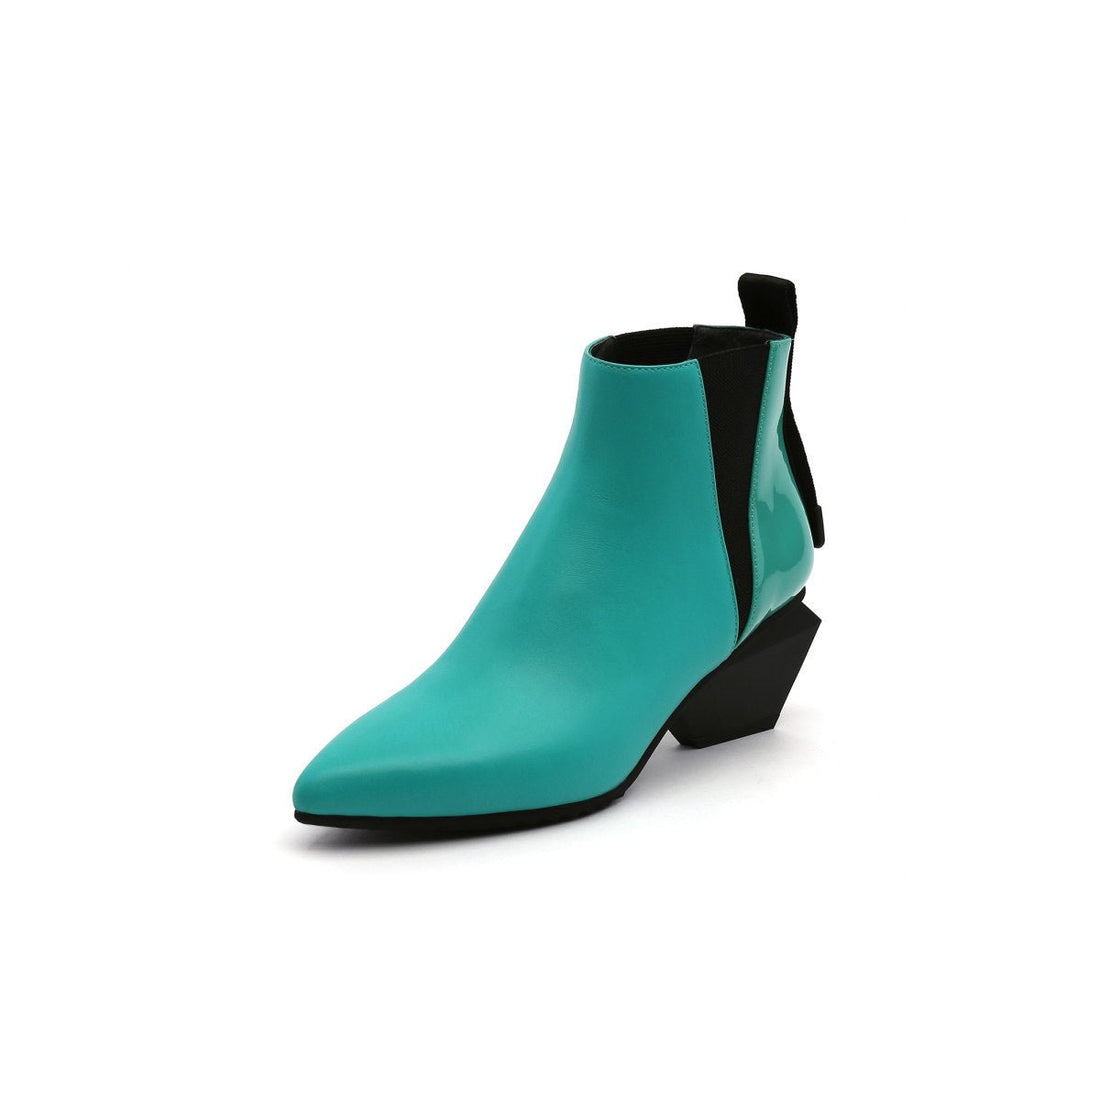 Cubed Dimension Green Boots - 0cm